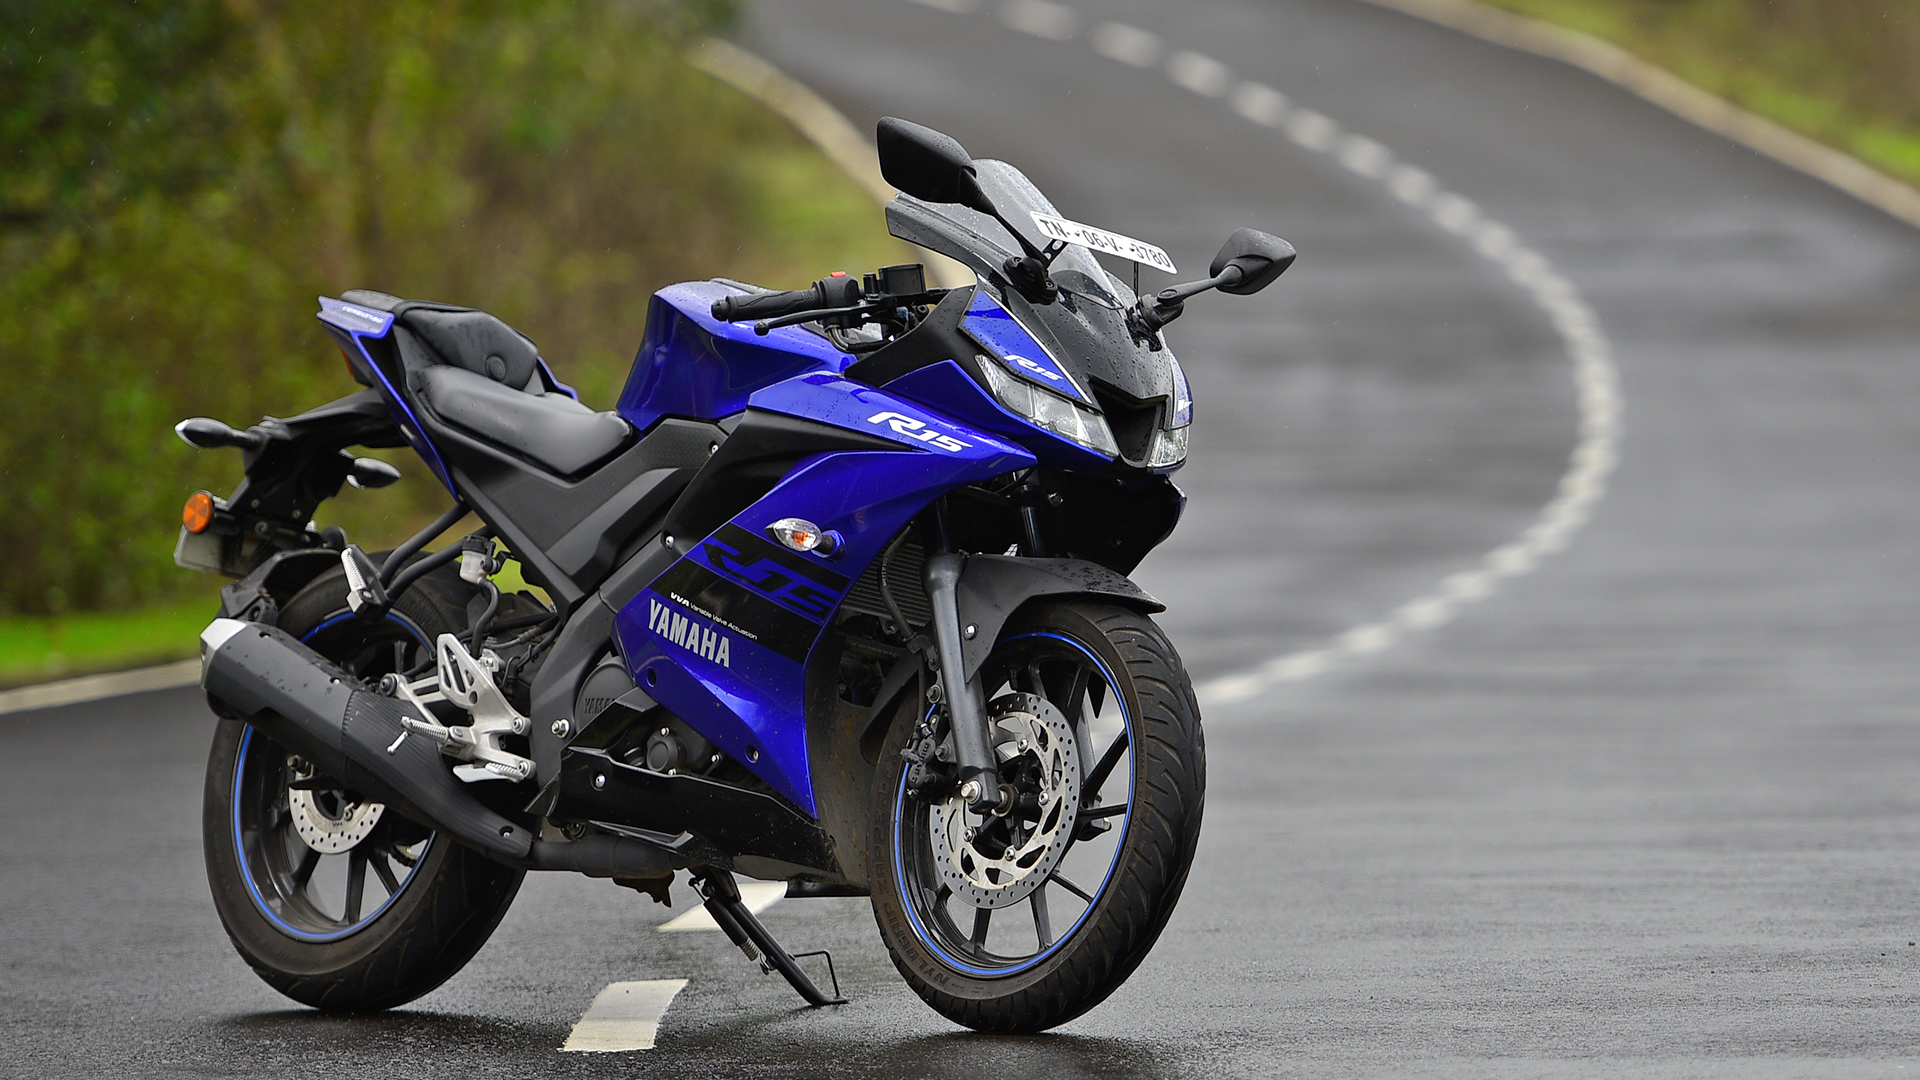 Yamaha R15 Unleashing Power and Performance in a Sporty Package